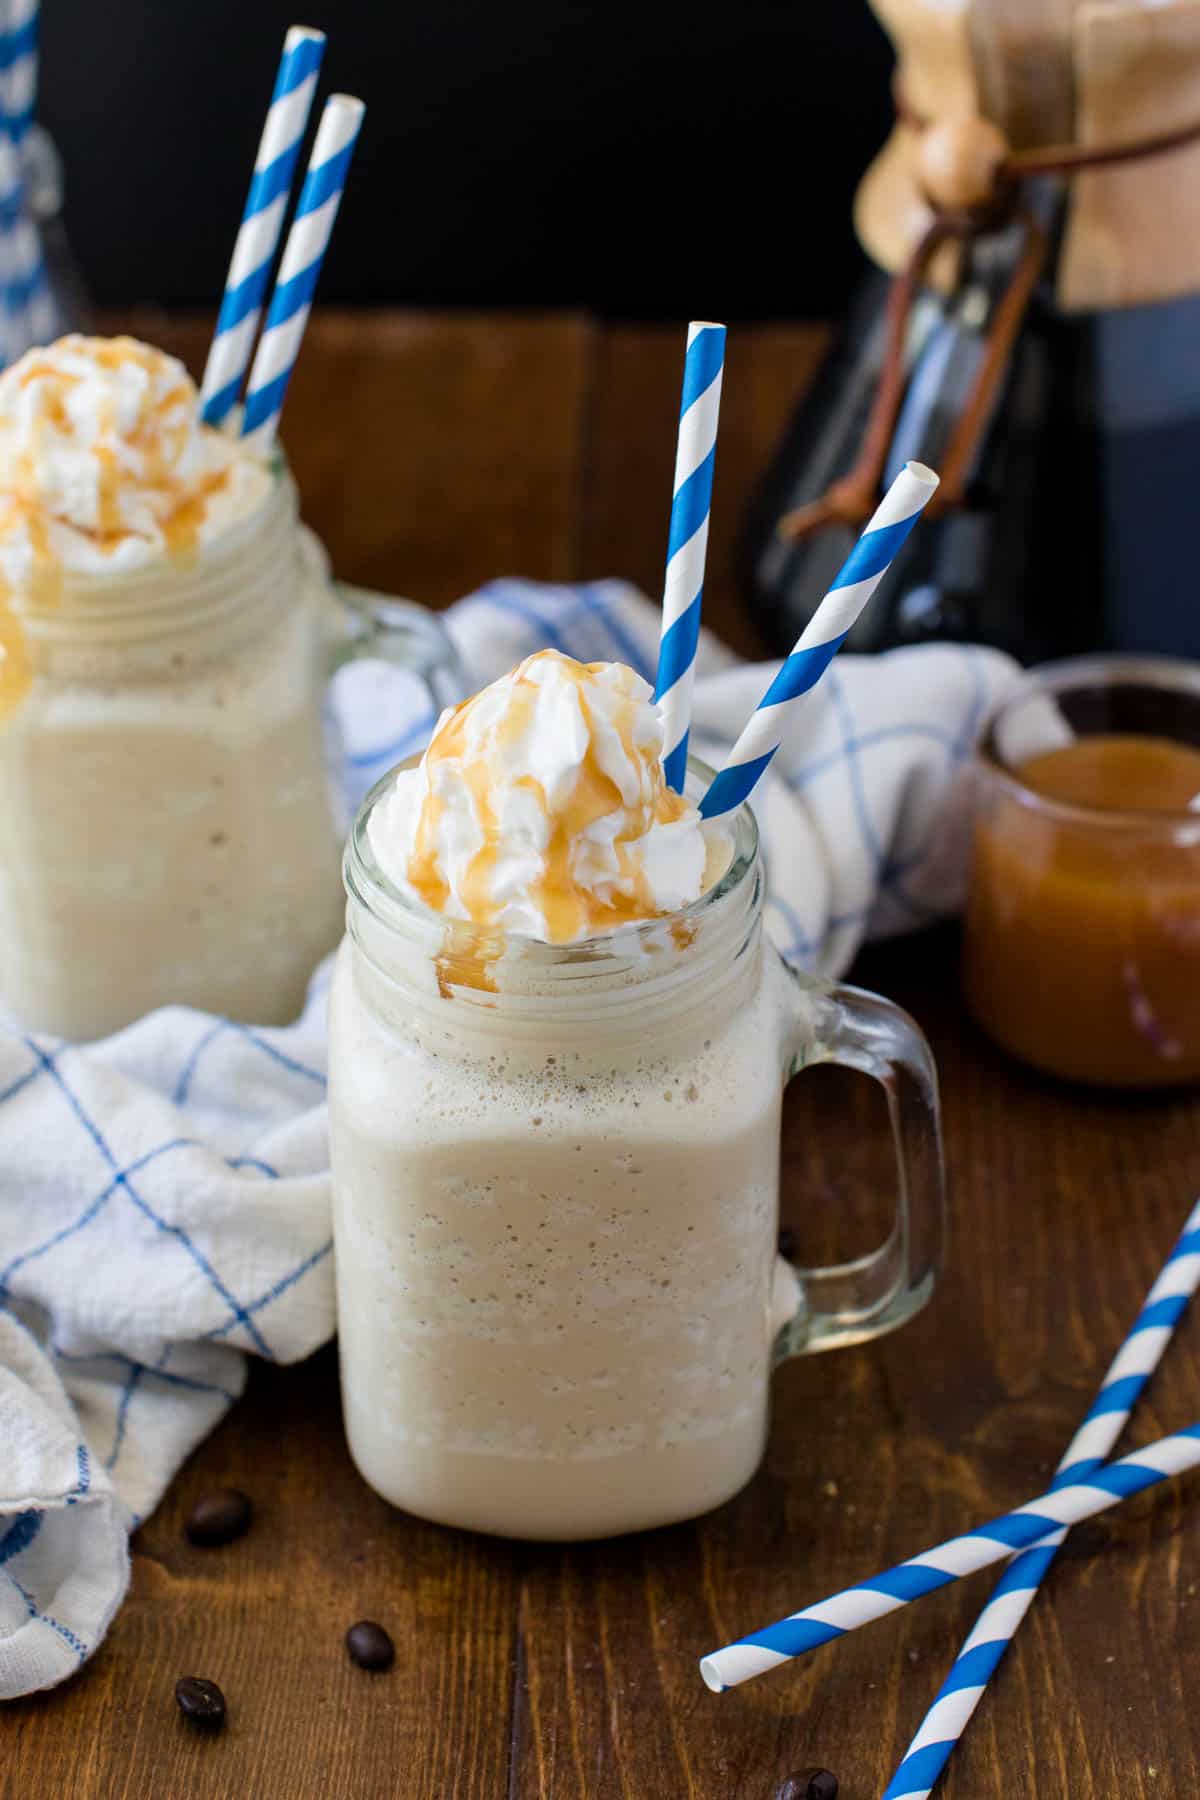 Caramel Coffee Milkshake - Freshly brewed coffee, caramel and vanilla ice cream make the ultimate milkshake. This is the perfect sweet indulgence and caffeine jolt, blended into one delicious treat.